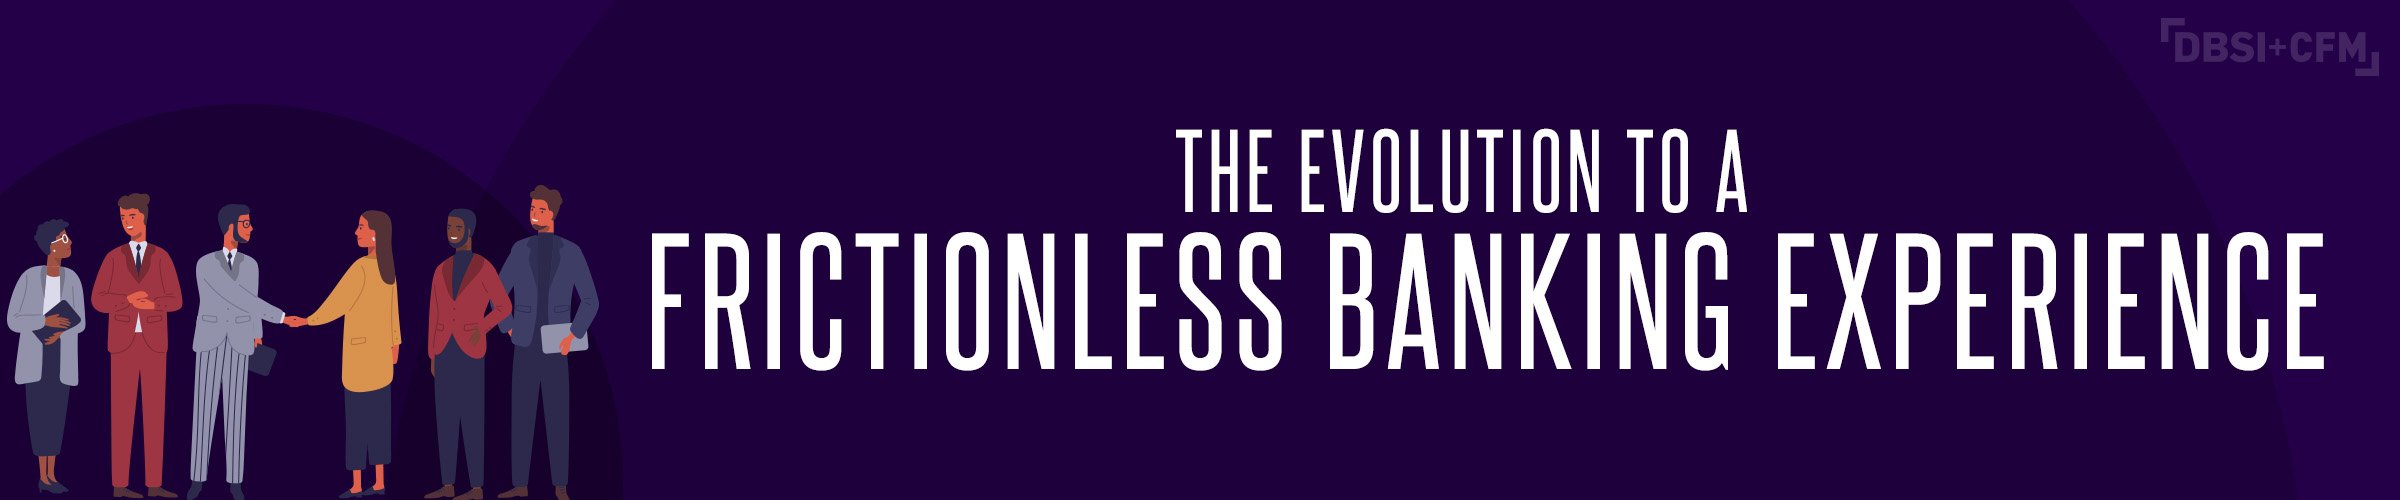 Evolution to a Frictionless Banking Experience